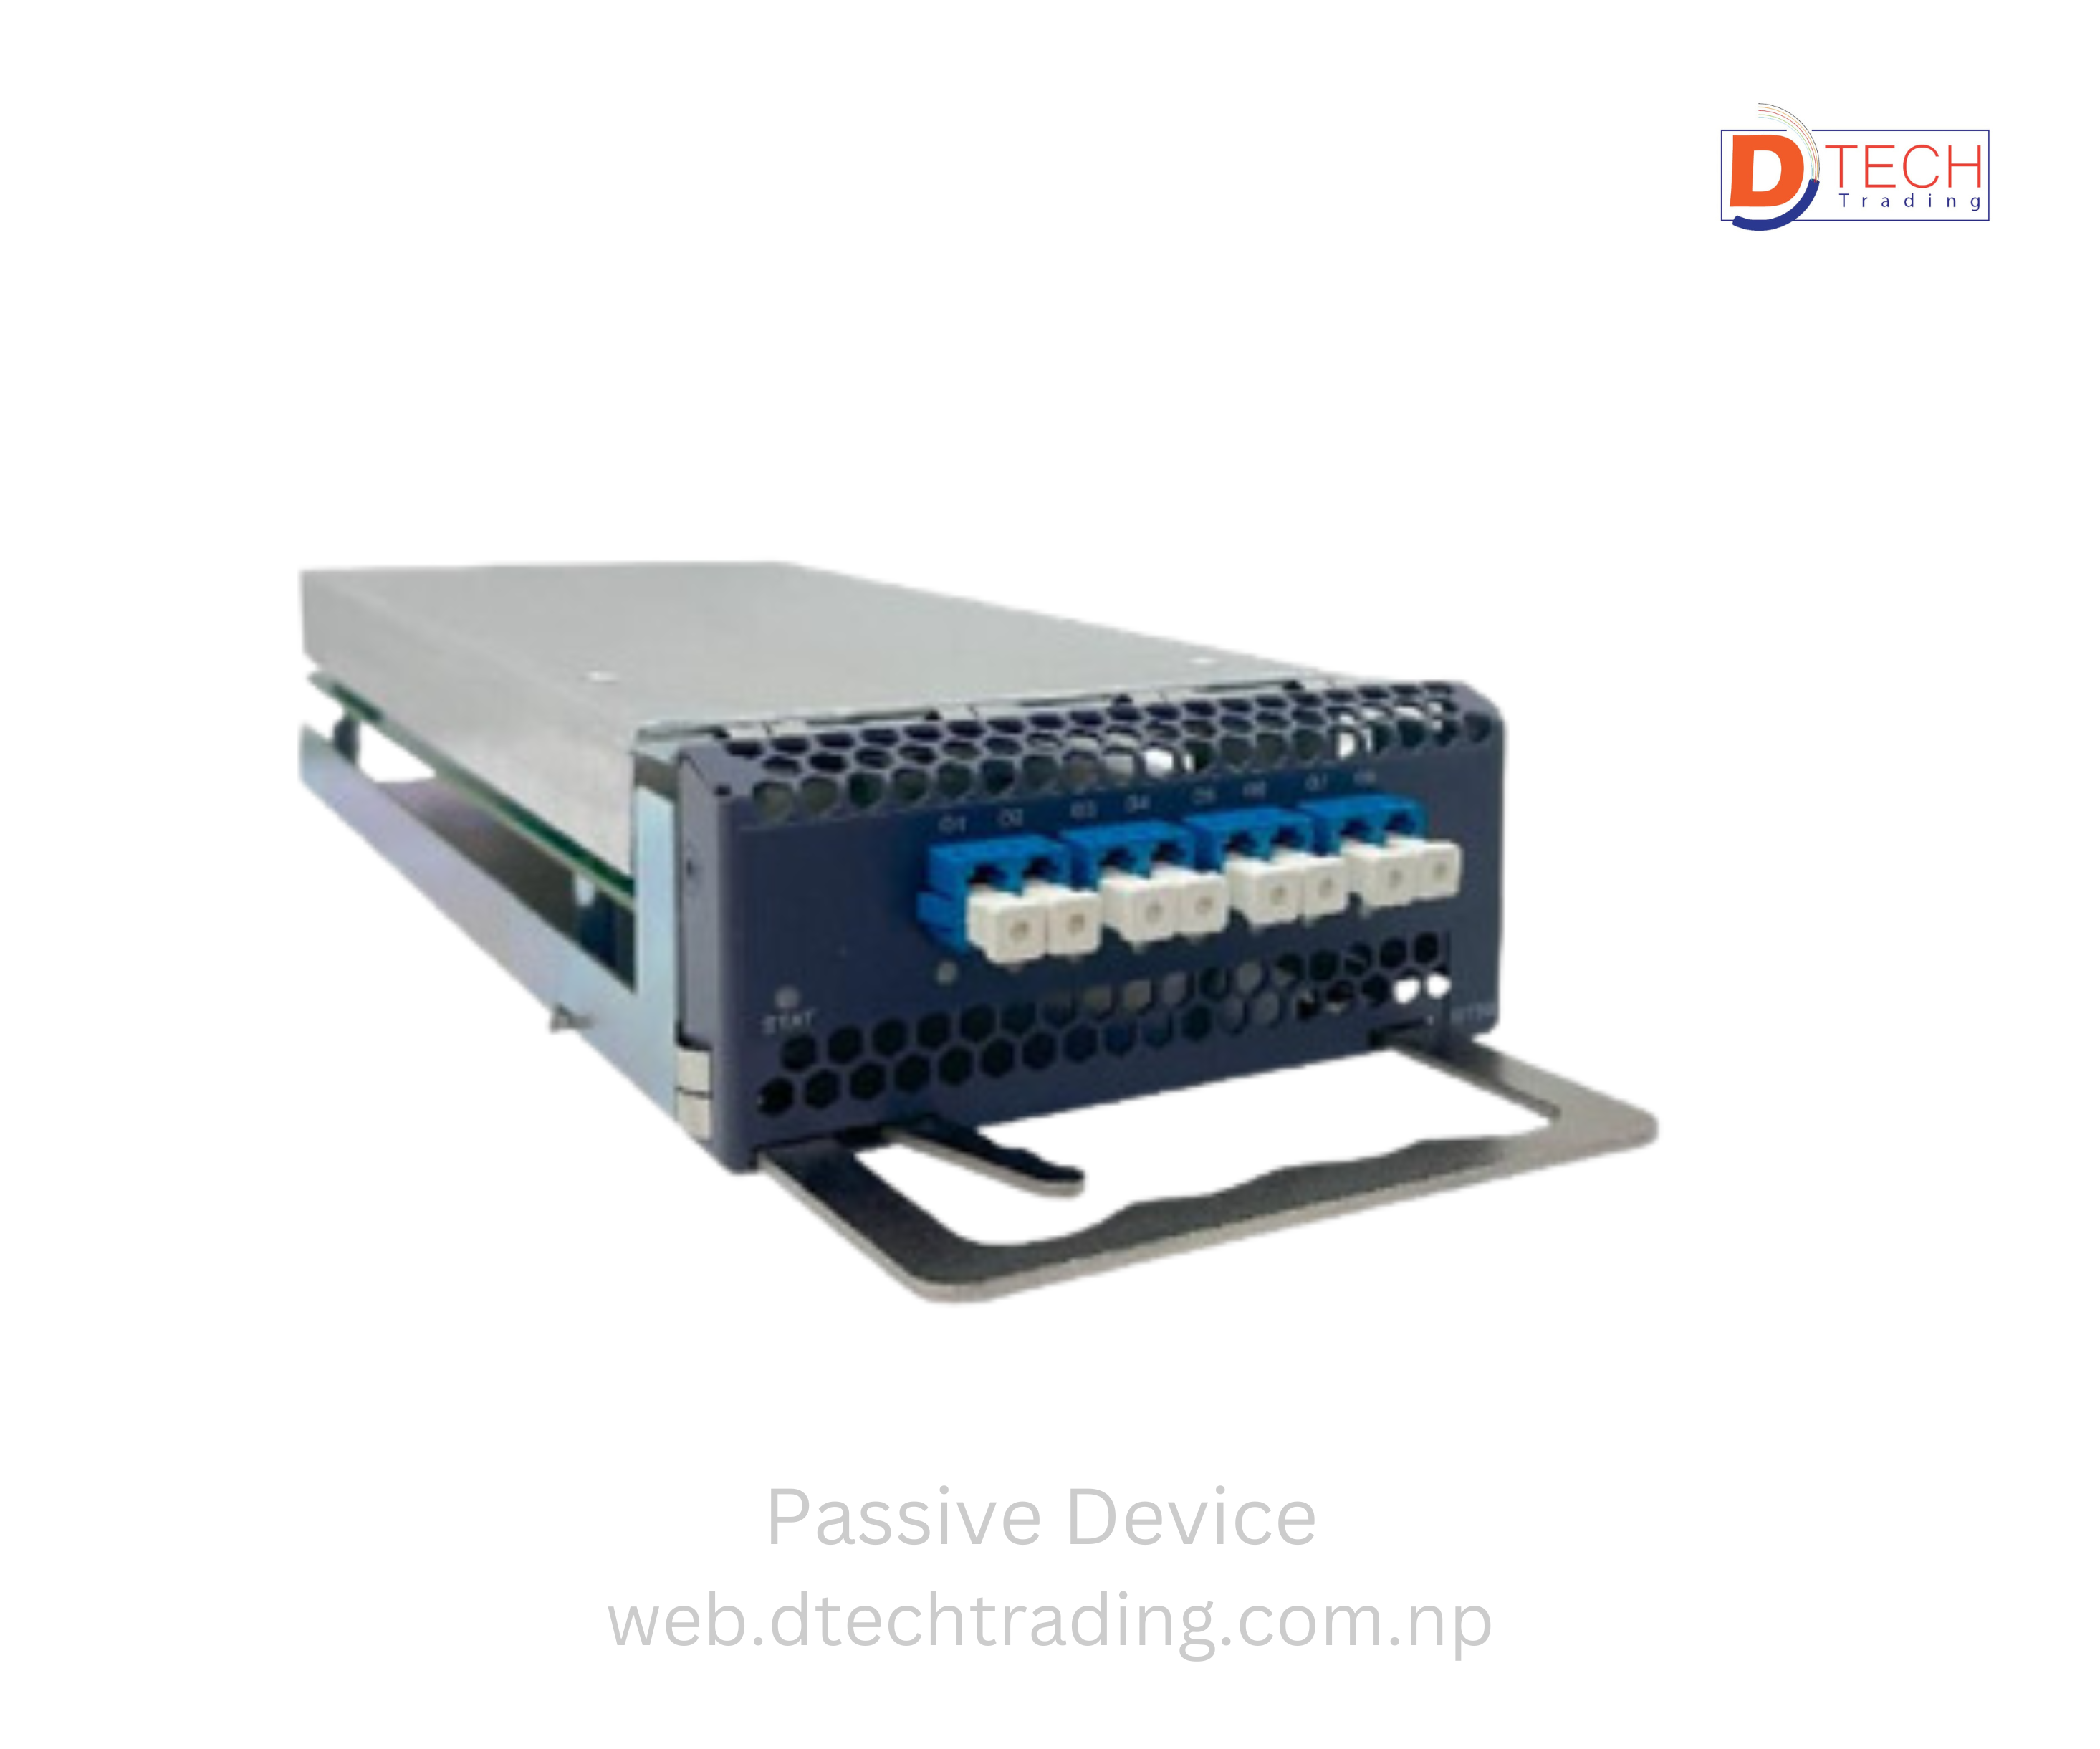 OCM (Optical Channel Monitoring Card)